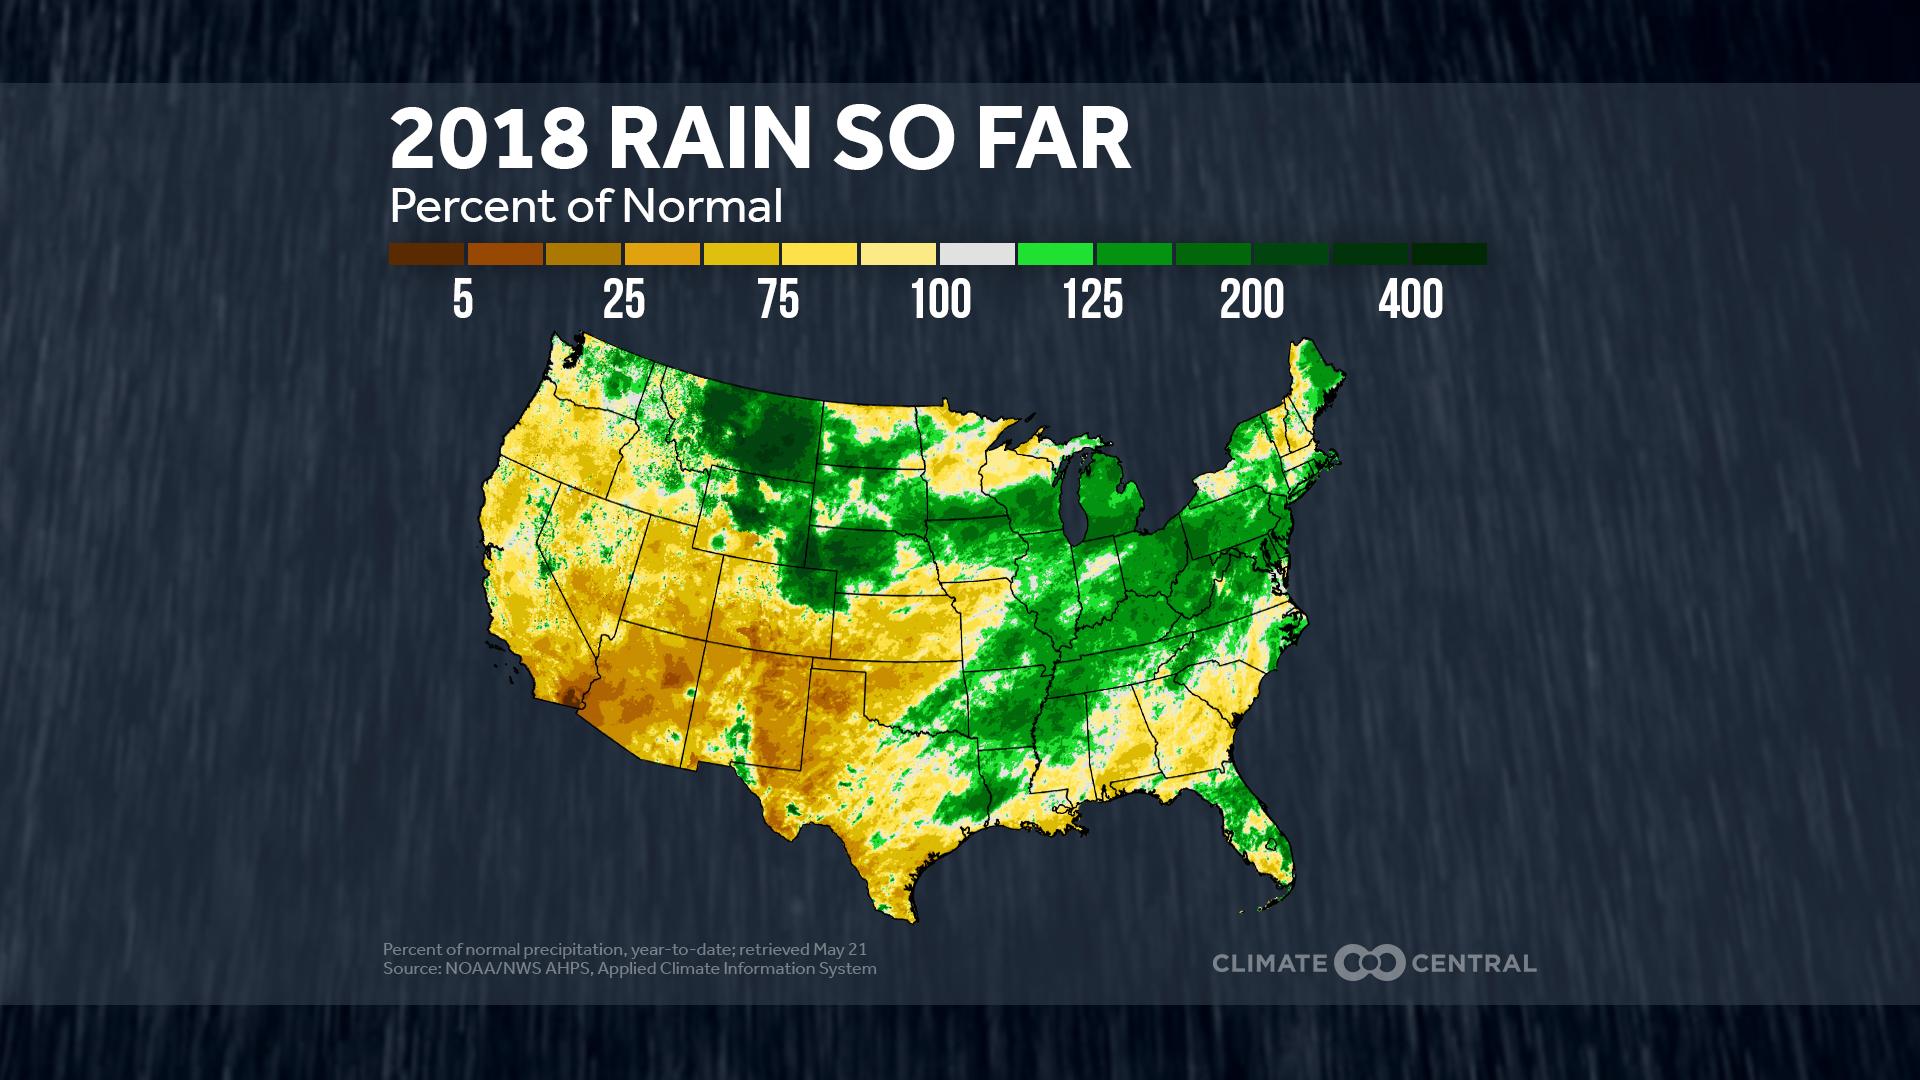 Drought & Deluge in 2018